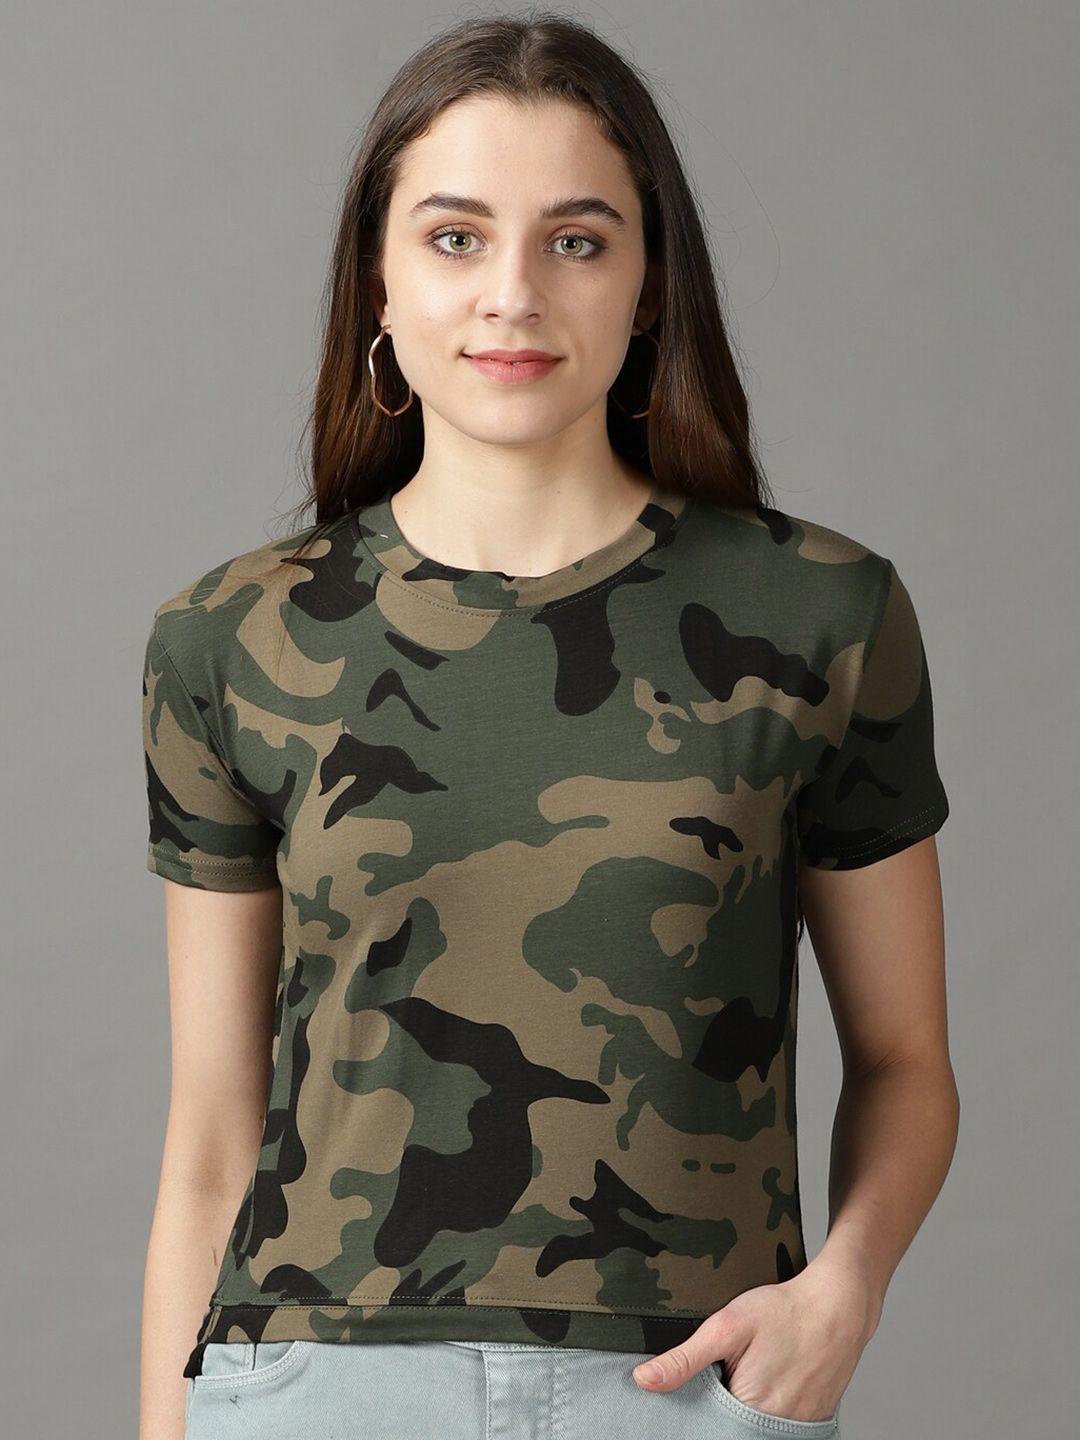 showoff short sleeves round neck printed top